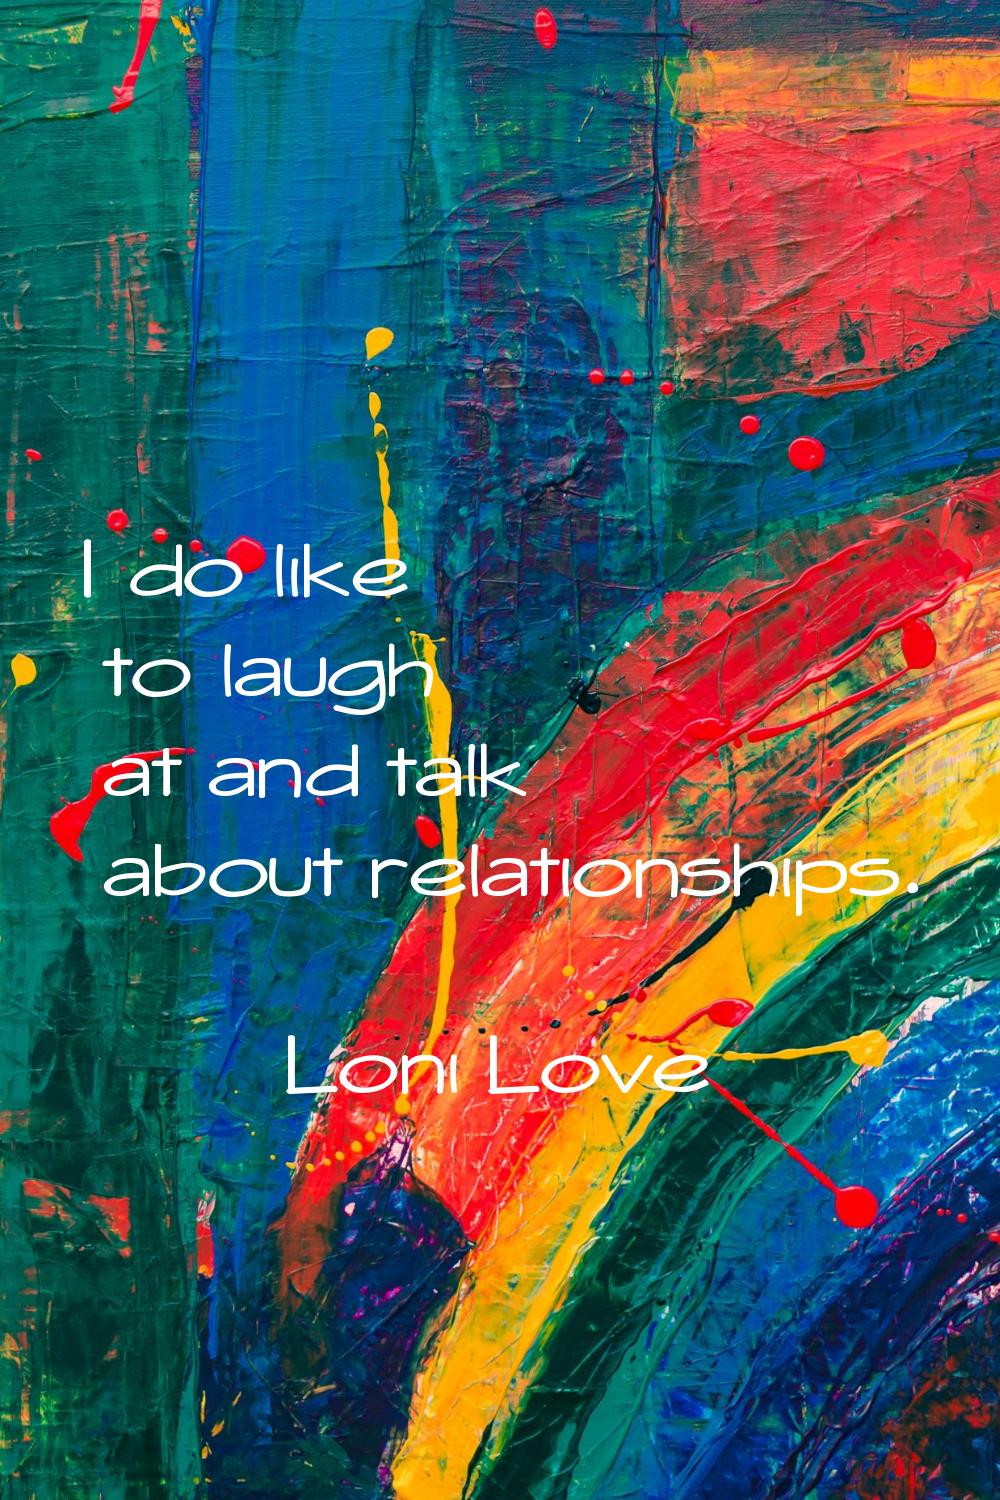 I do like to laugh at and talk about relationships.